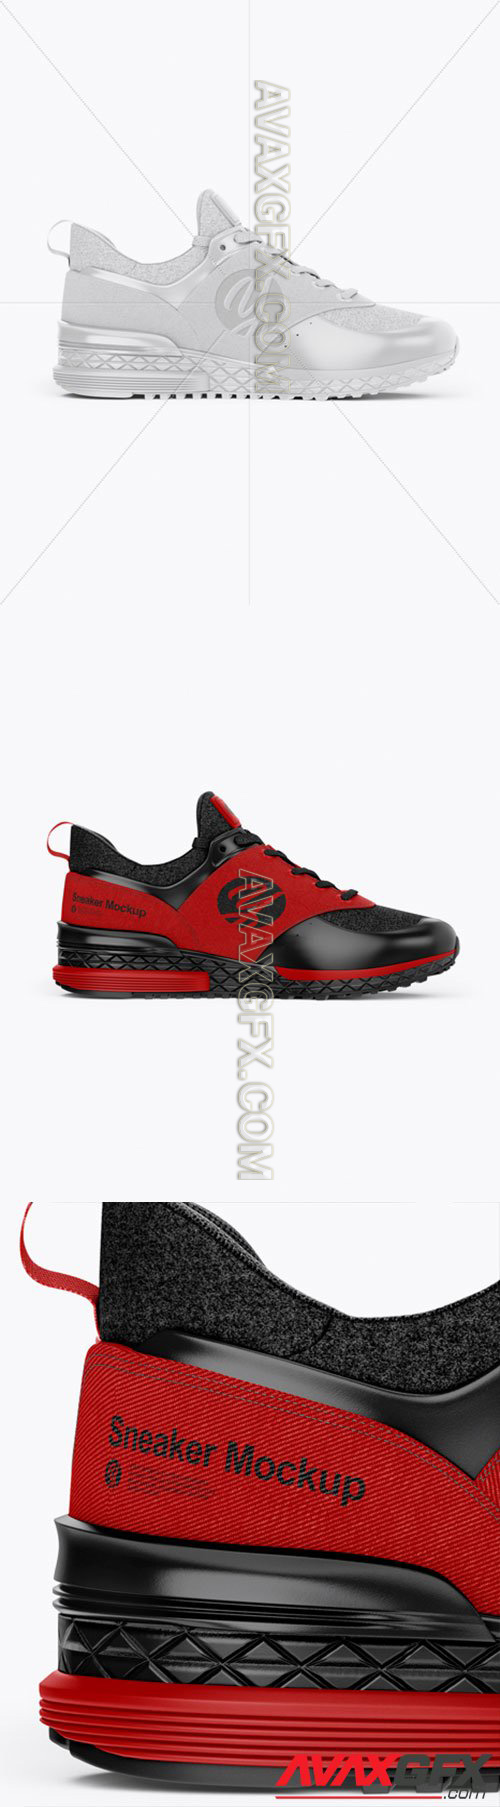 Sneaker Mockup - Right Side View 26865